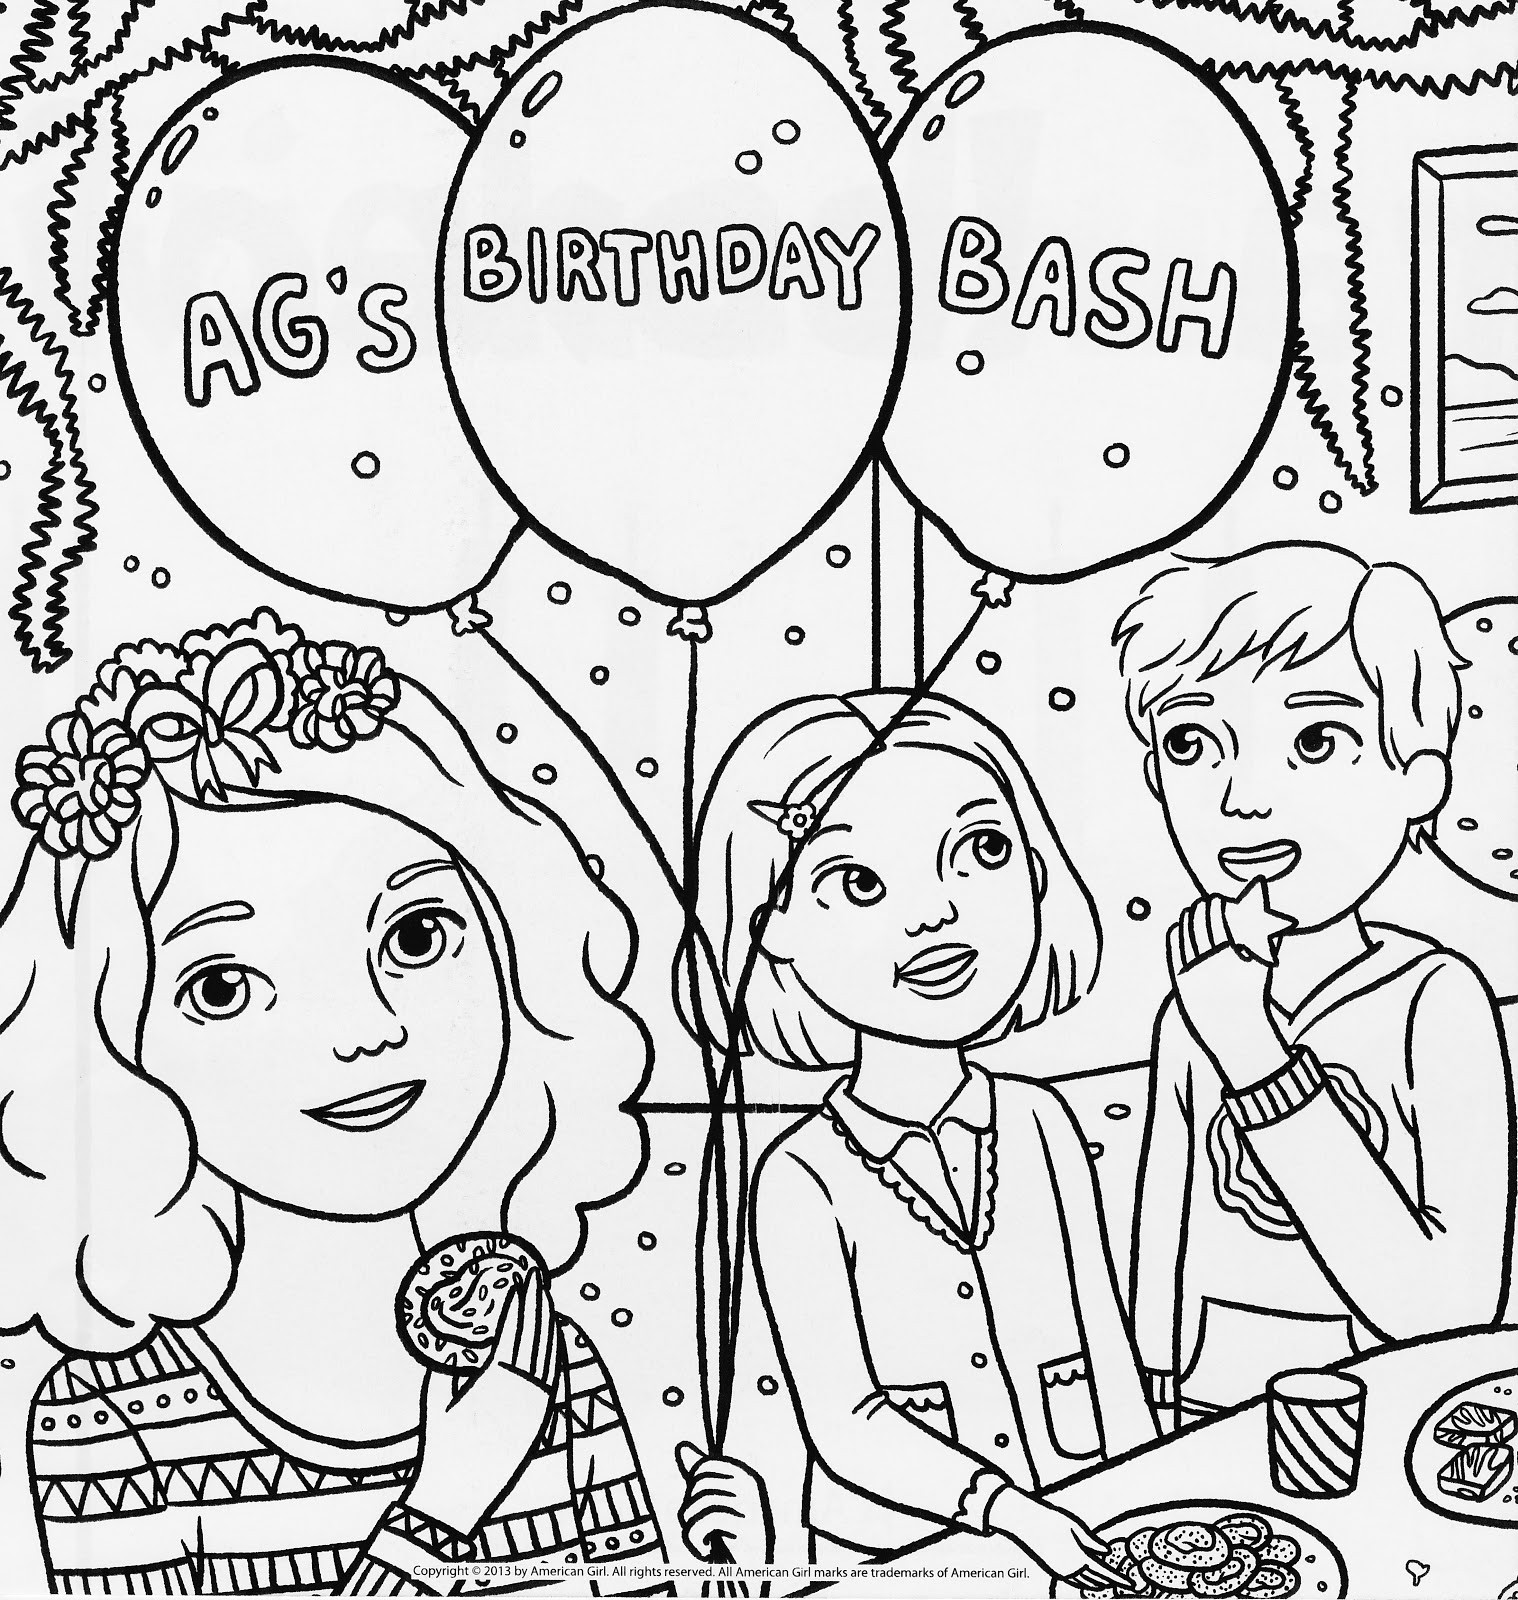 Magazine Coloring Sheets For Kids
 Bonggamom Finds American Girl Magazine Special Birthday